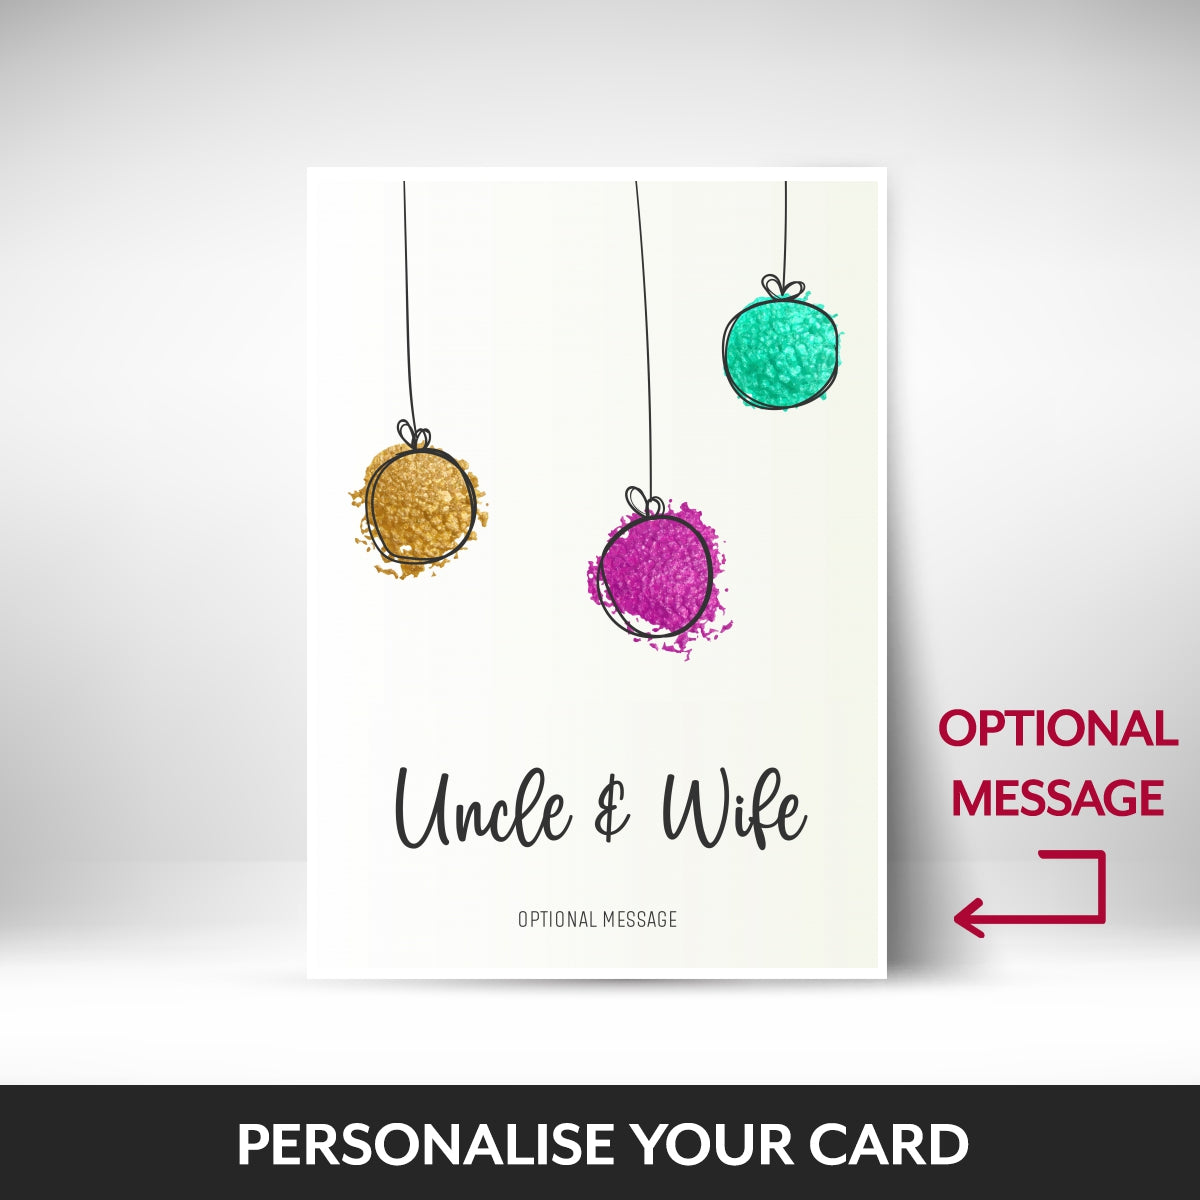 What can be personalised on this Uncle & Wife christmas cards